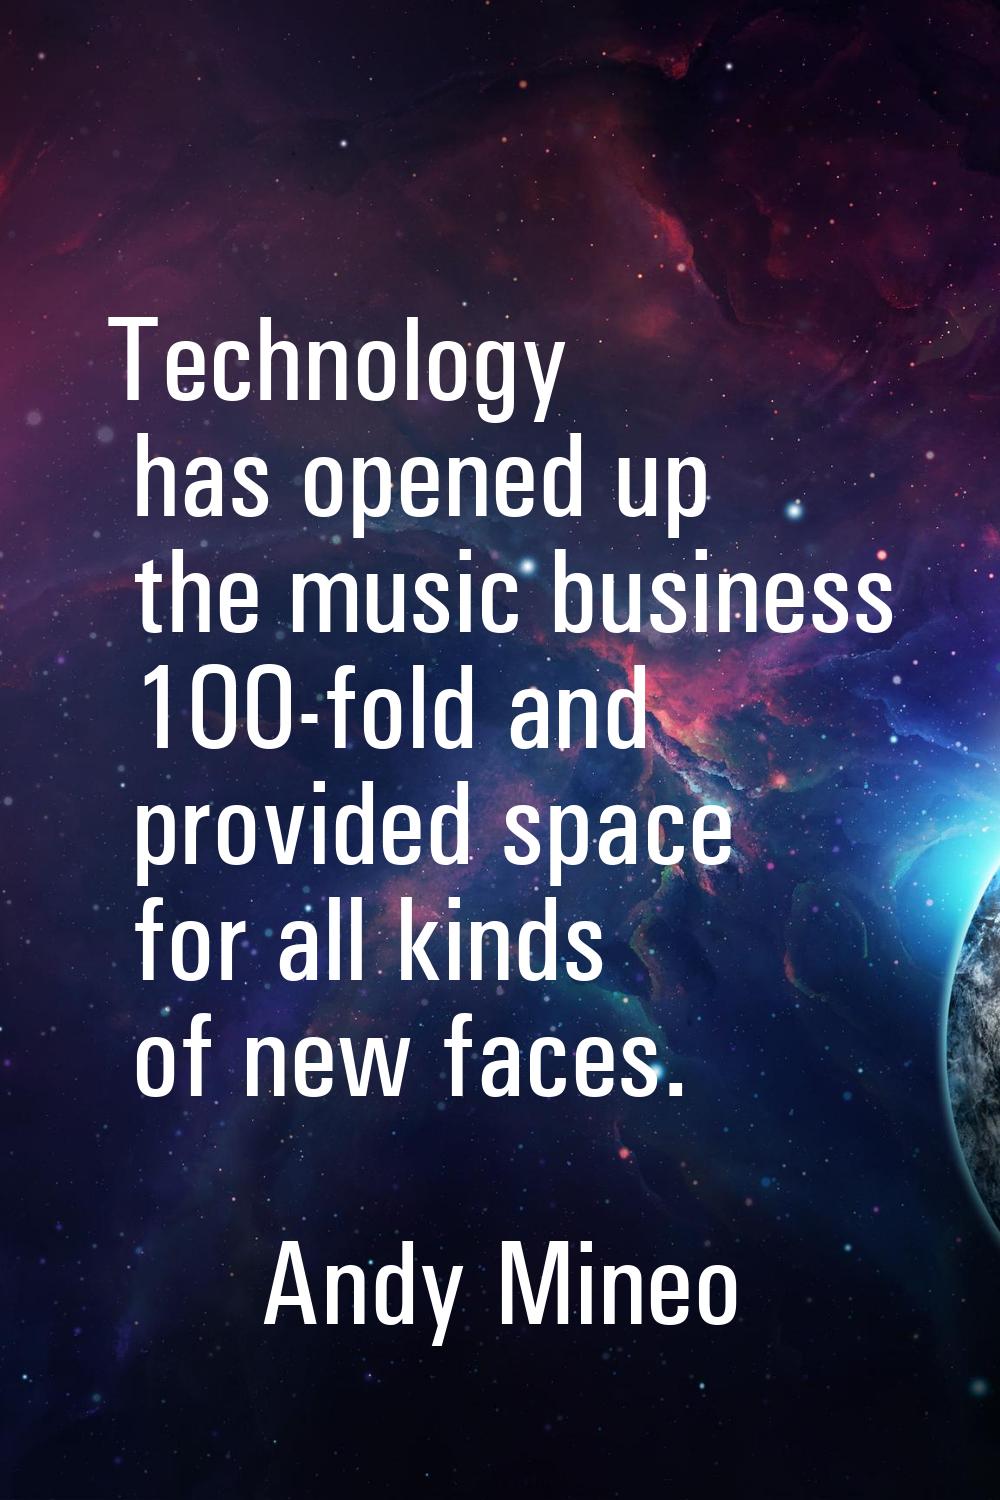 Technology has opened up the music business 100-fold and provided space for all kinds of new faces.